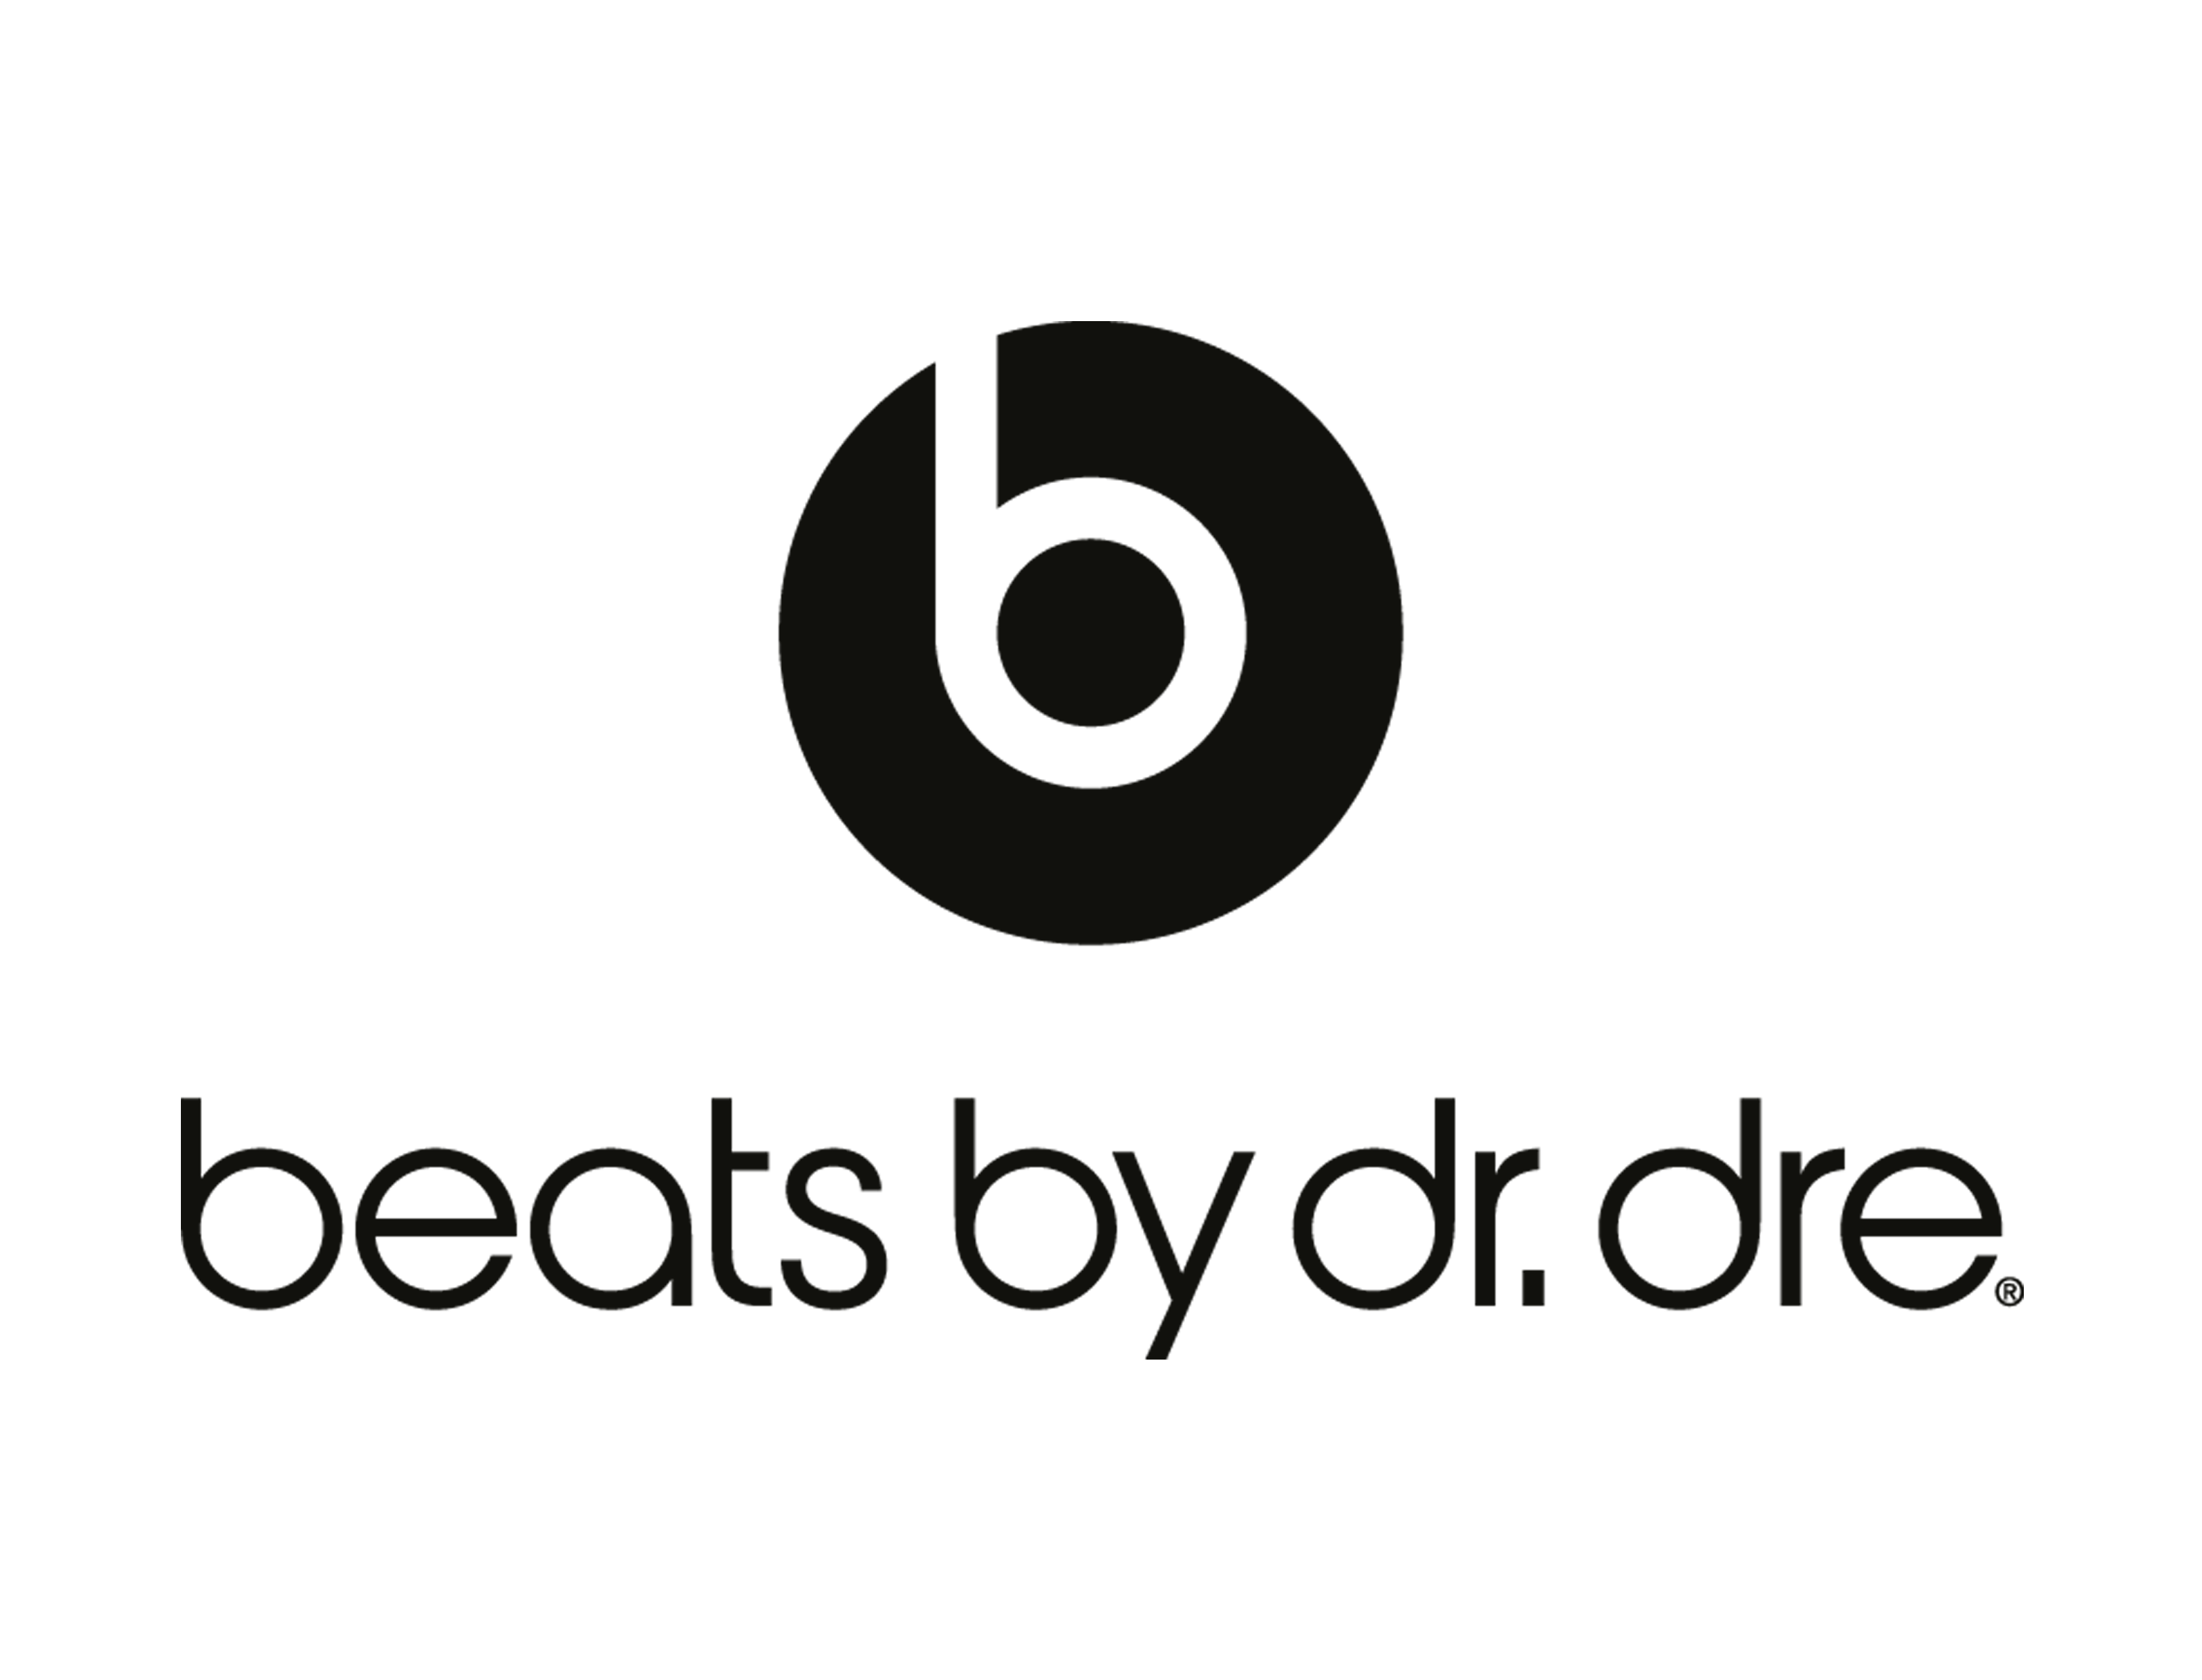 Beats by Dre Logo - Headphones | Stormfront - Your local Apple experts